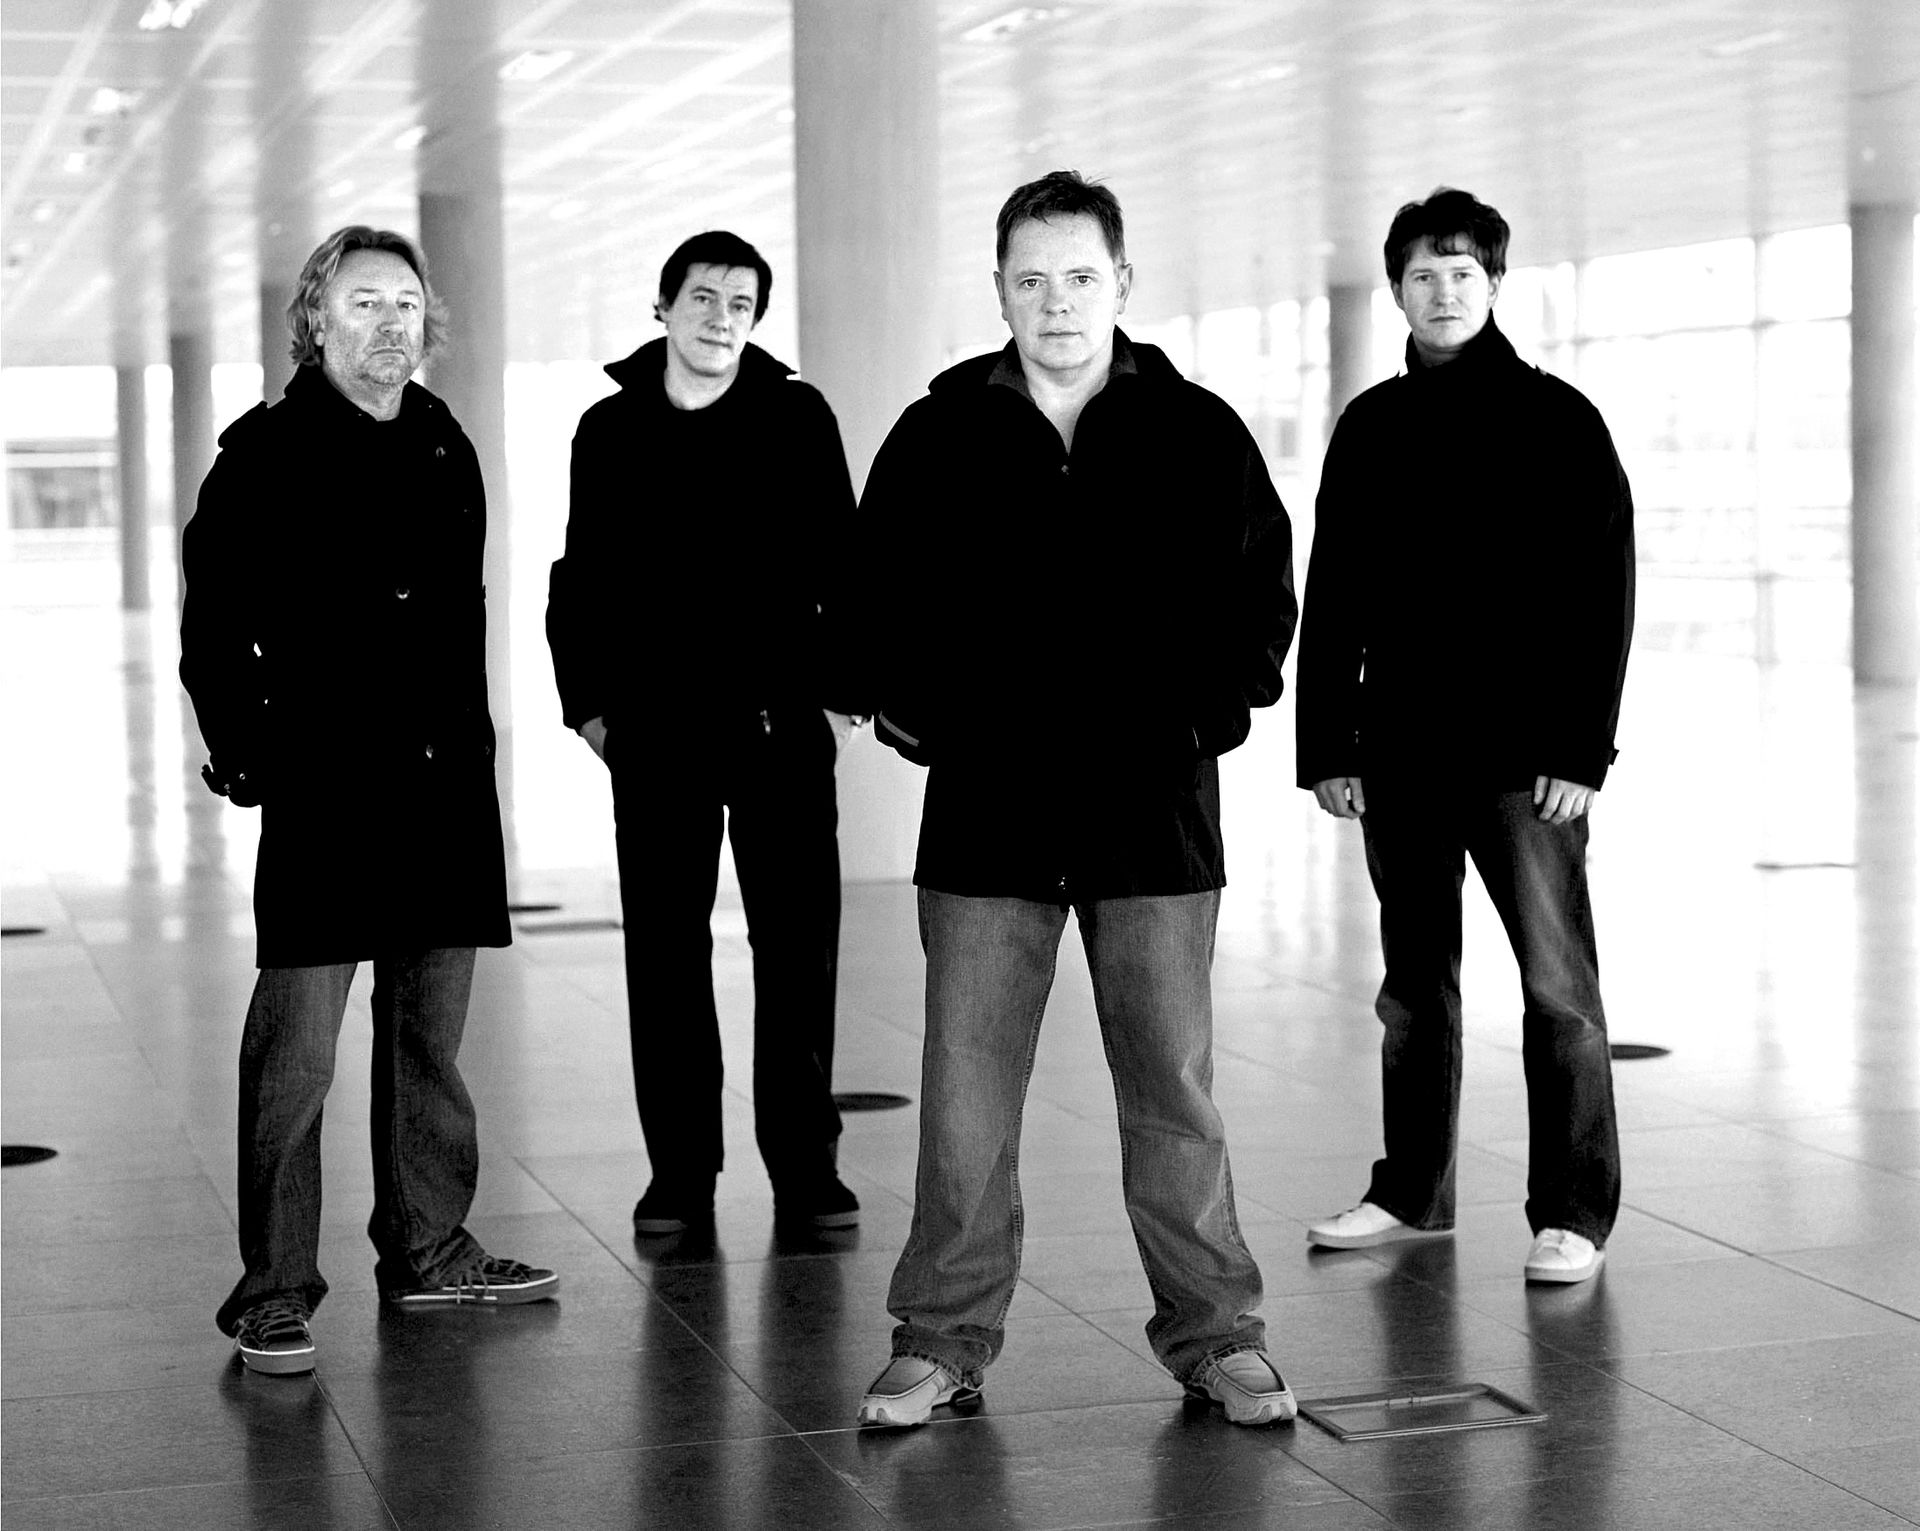 Have you new order. New order Band. New order вокалист. Солист Нью ордер. New order в молодости.